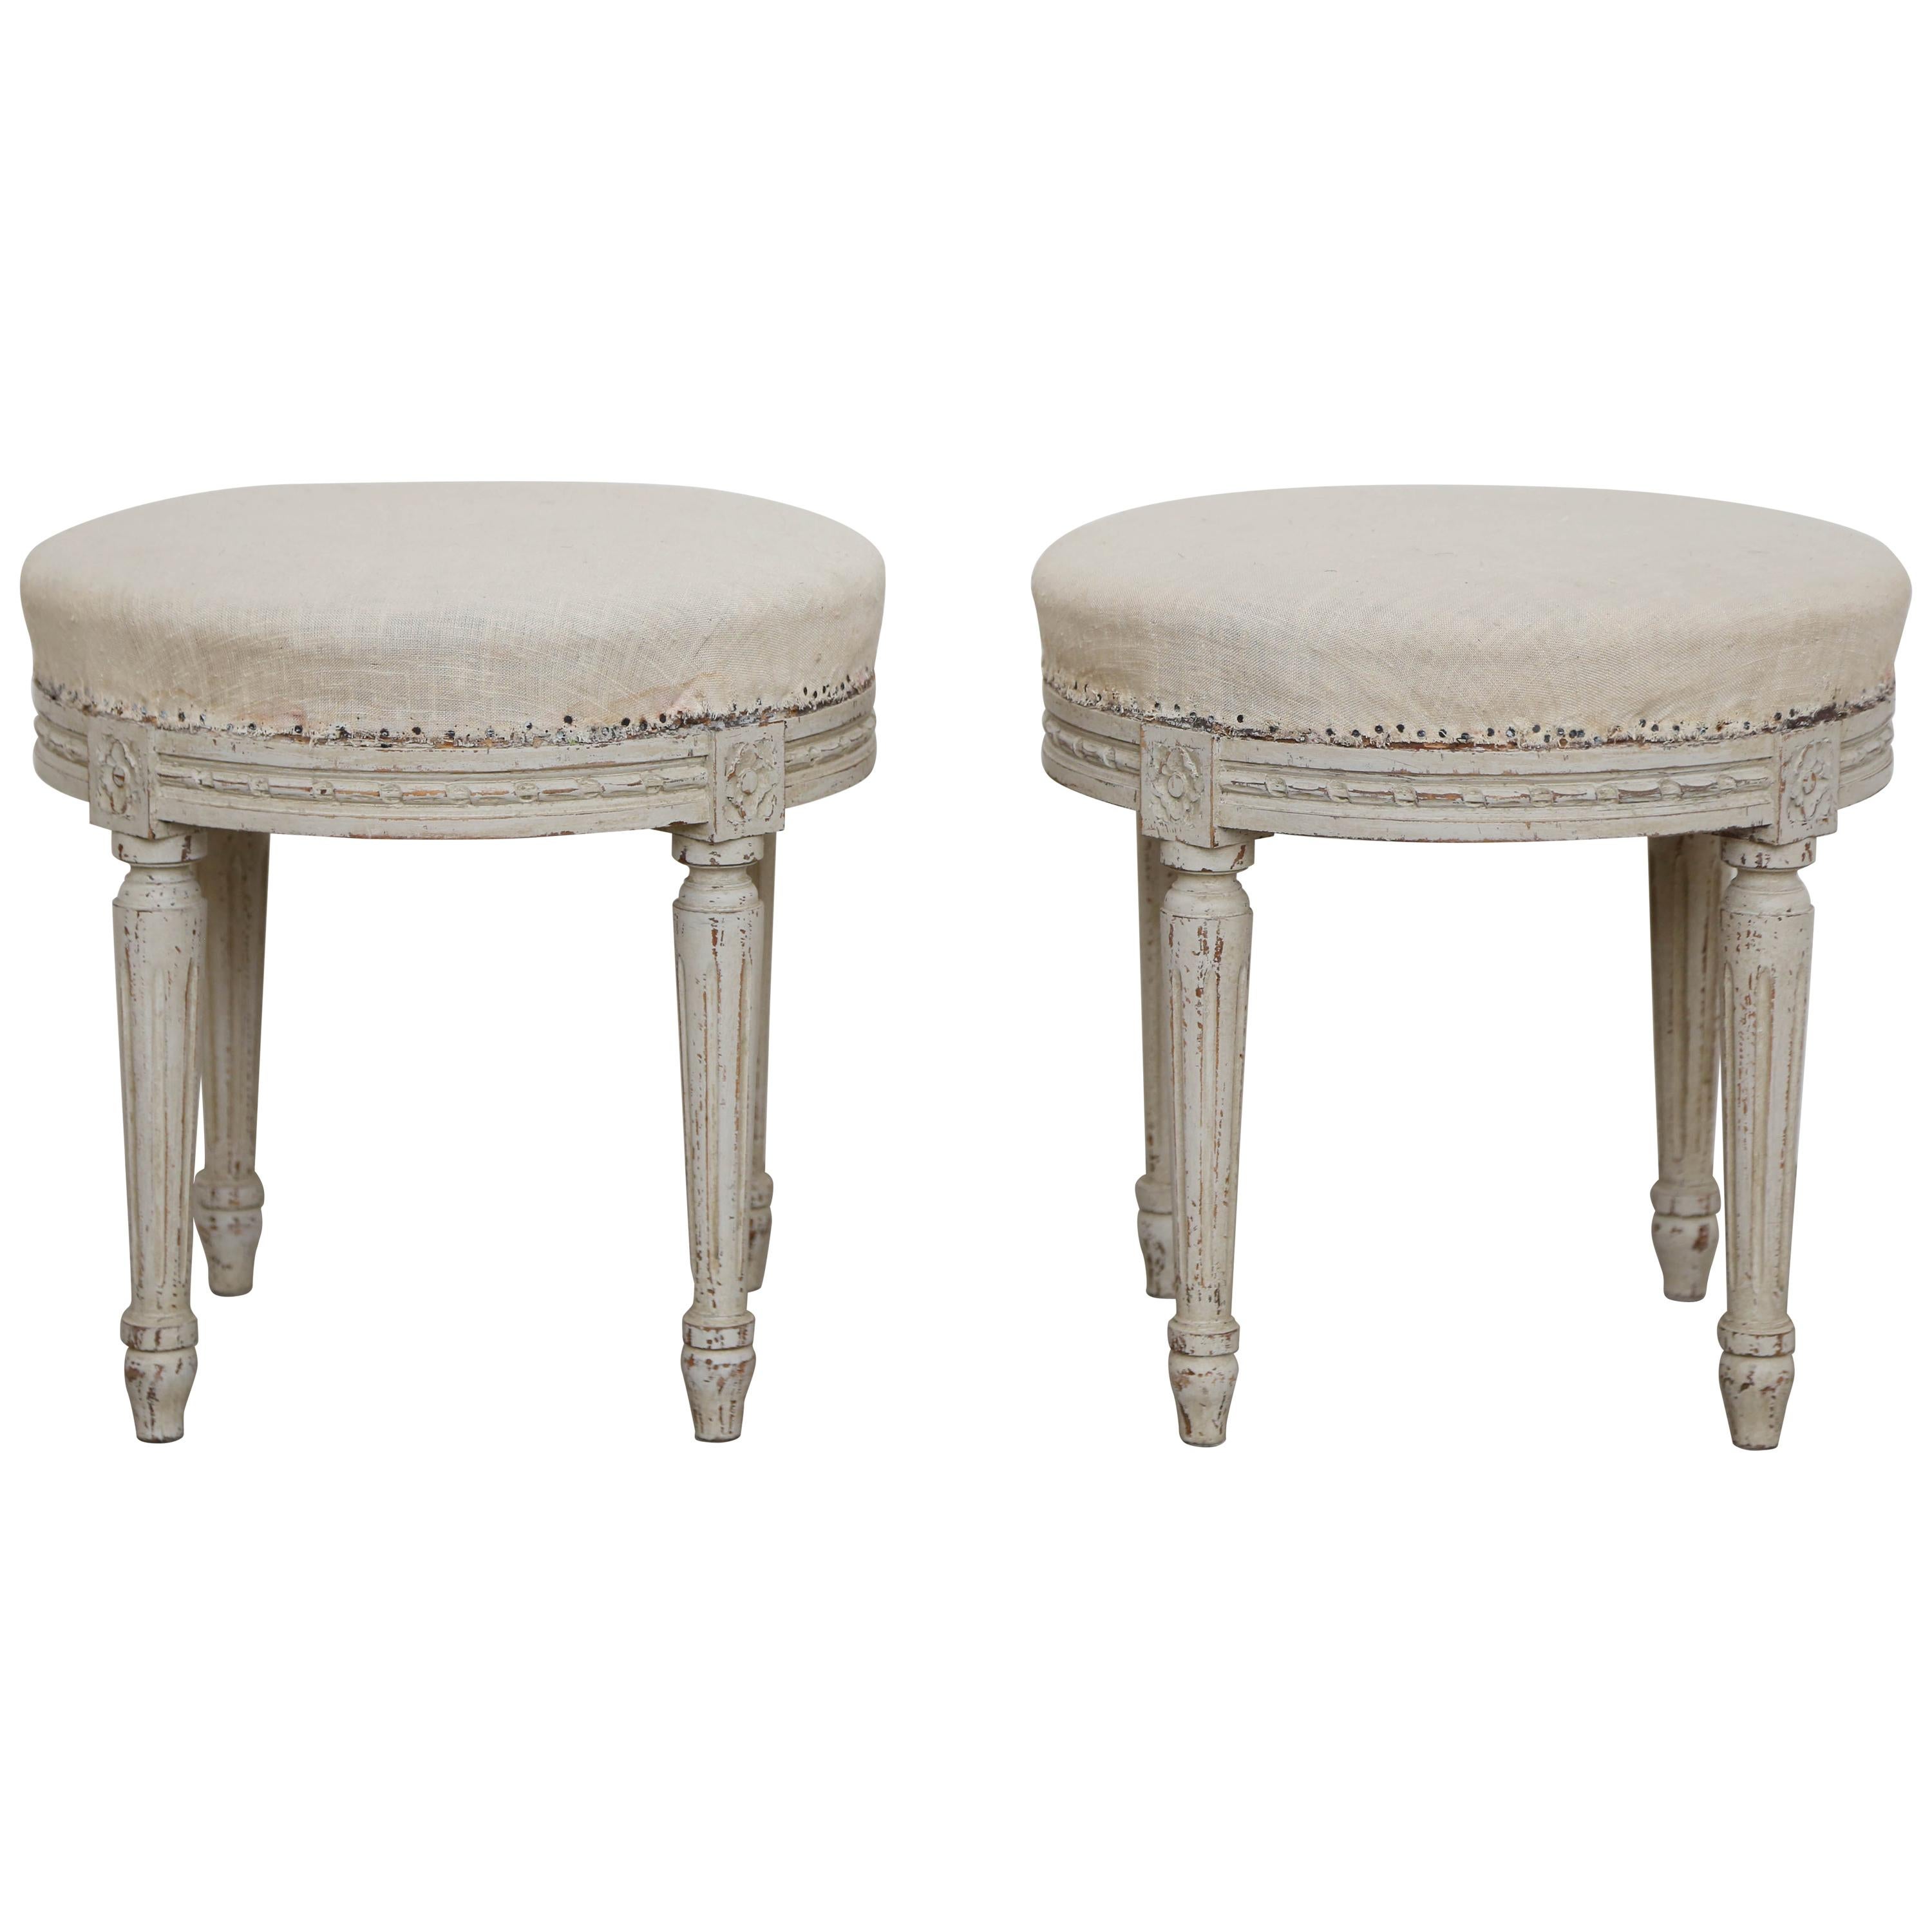 Pair of Antique Swedish Gustavian Style Painted Round Stools, Late 19th Century